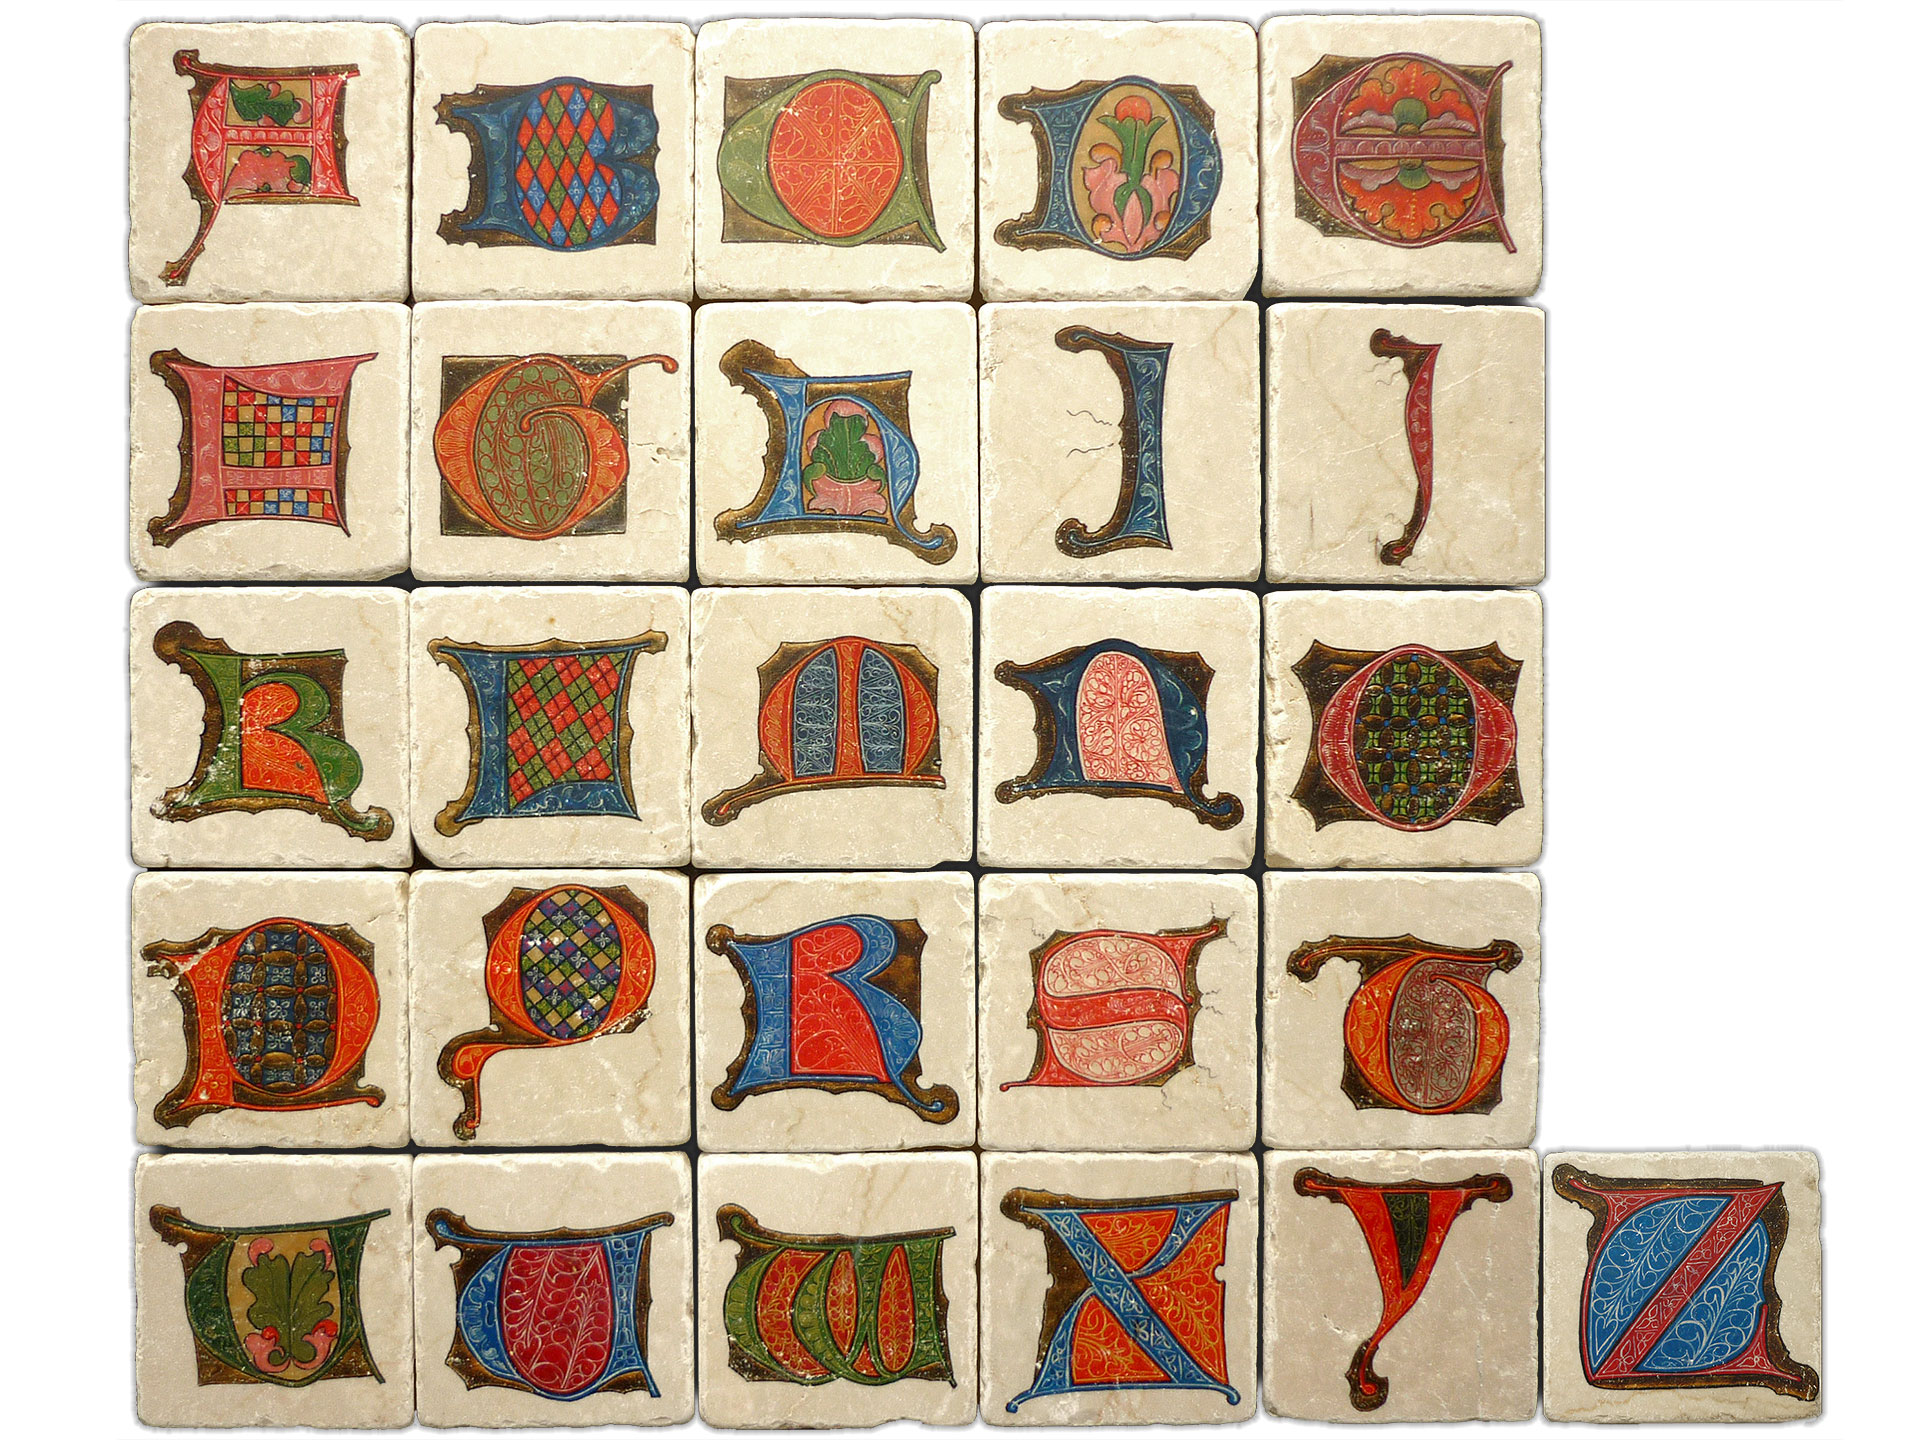 Marble tiles with 15th century initials